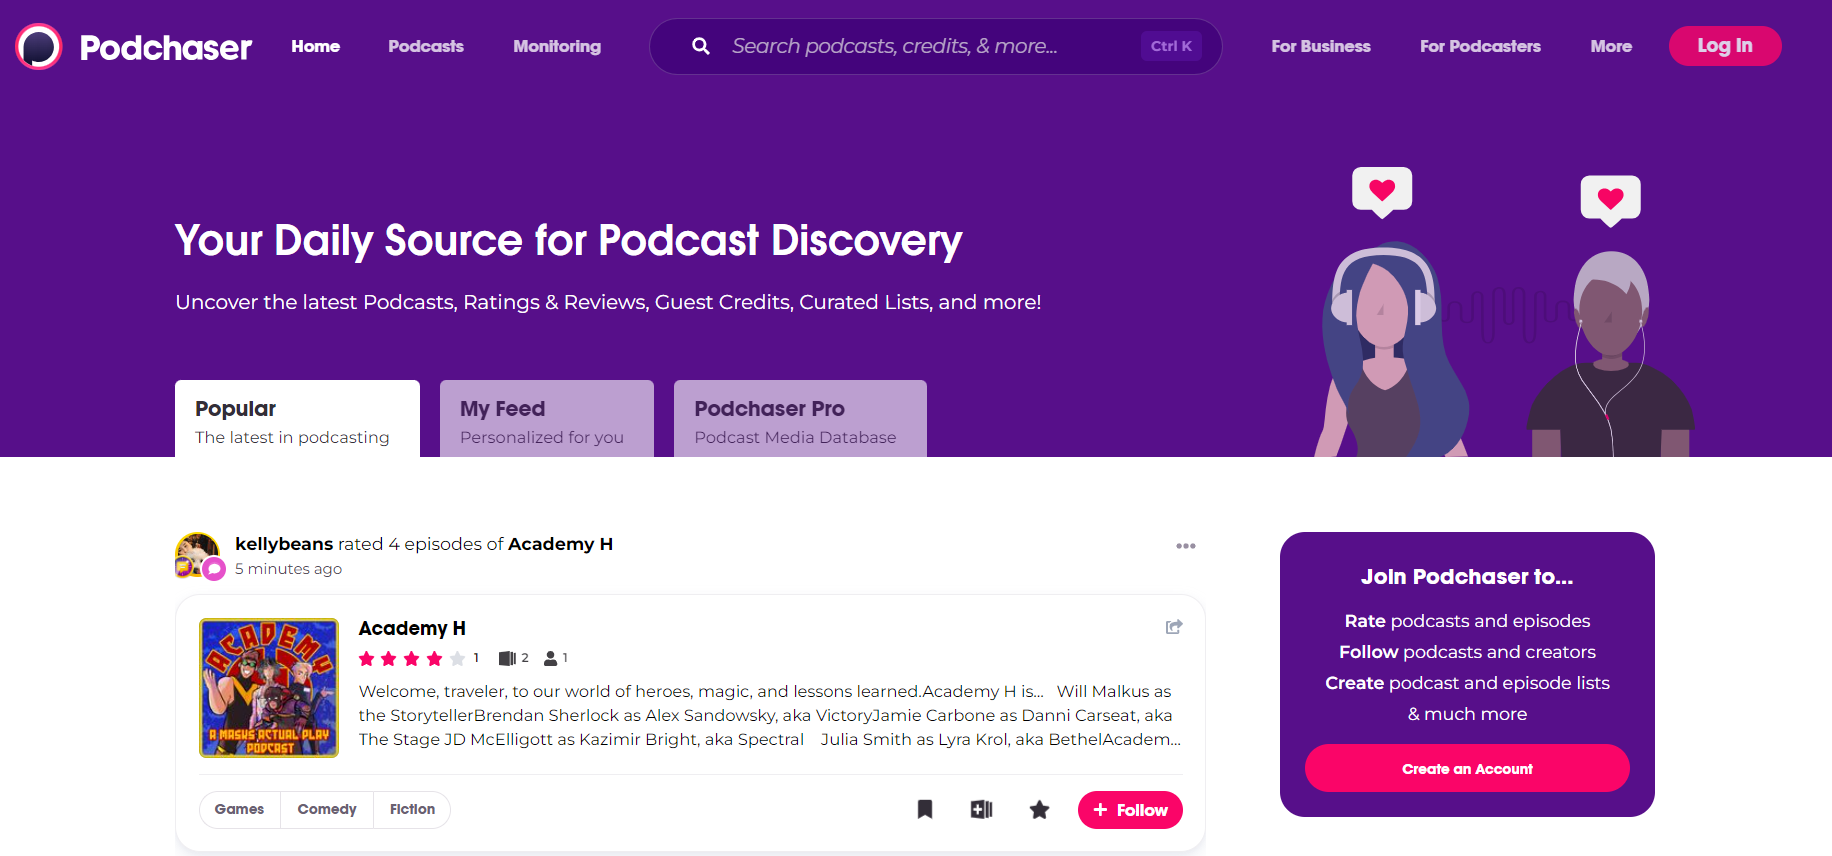 Finding new AI podcasts on Podchaser